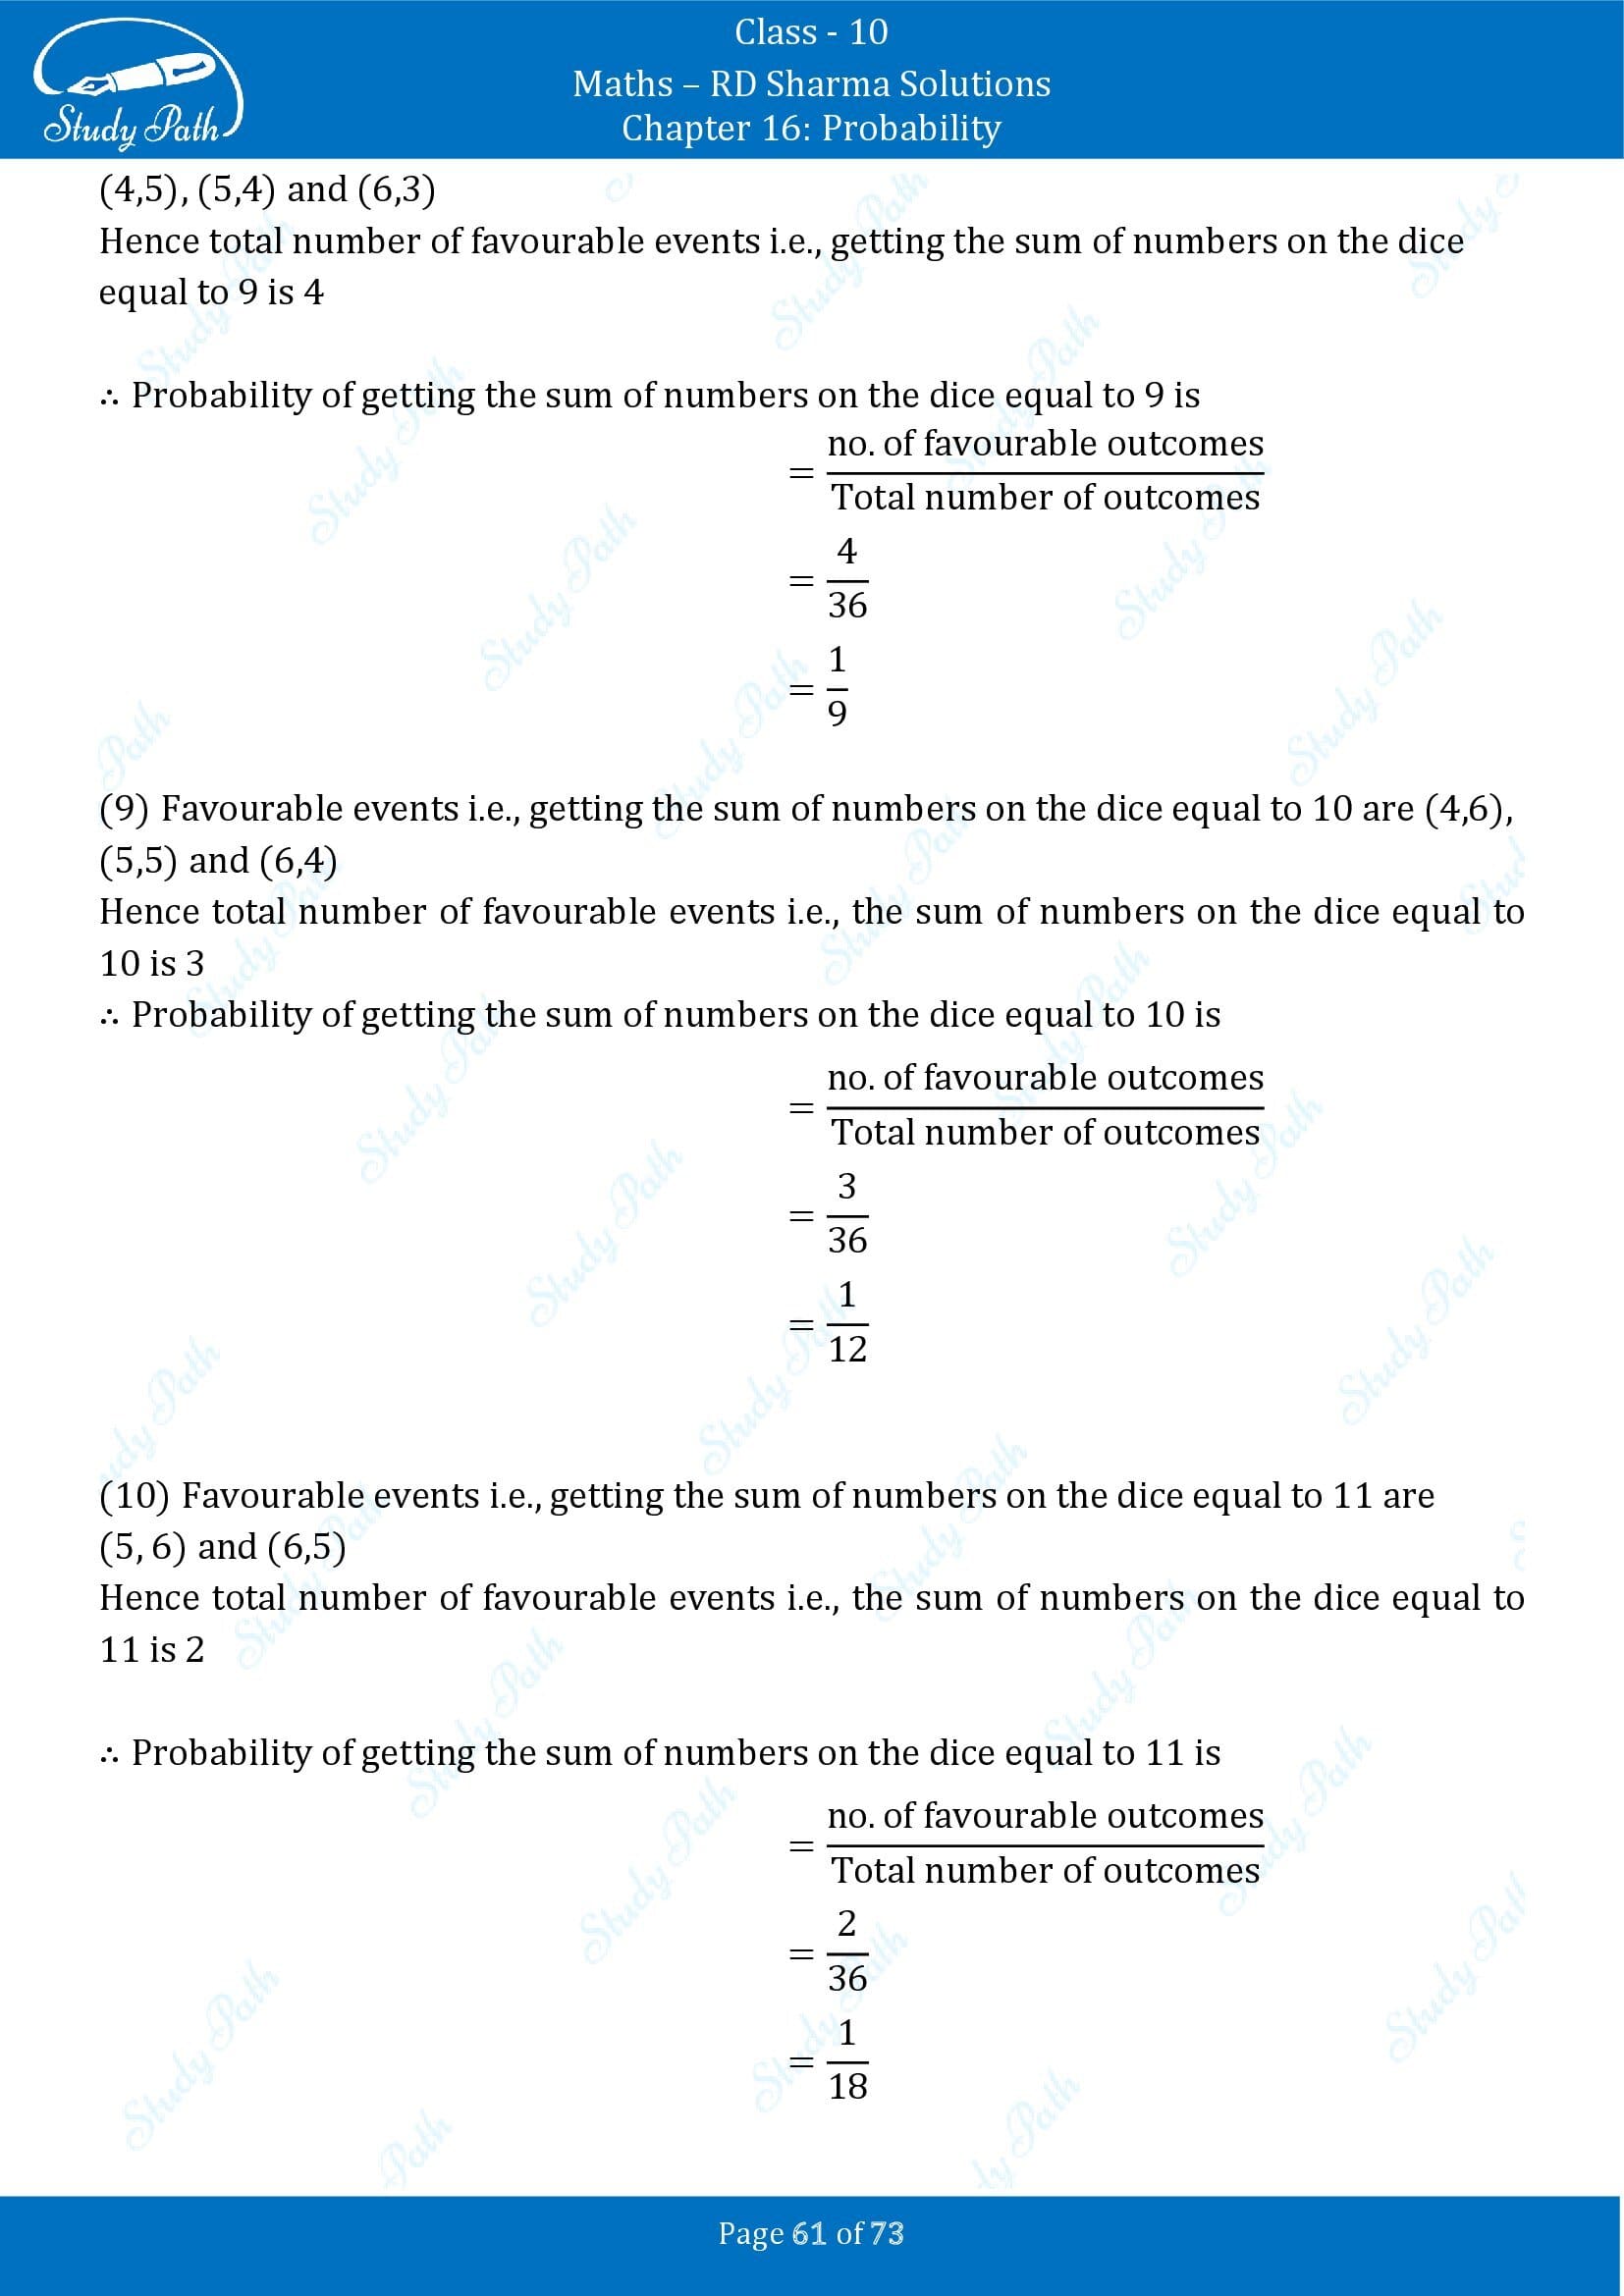 RD Sharma Solutions Class 10 Chapter 16 Probability Exercise 16.1 00061